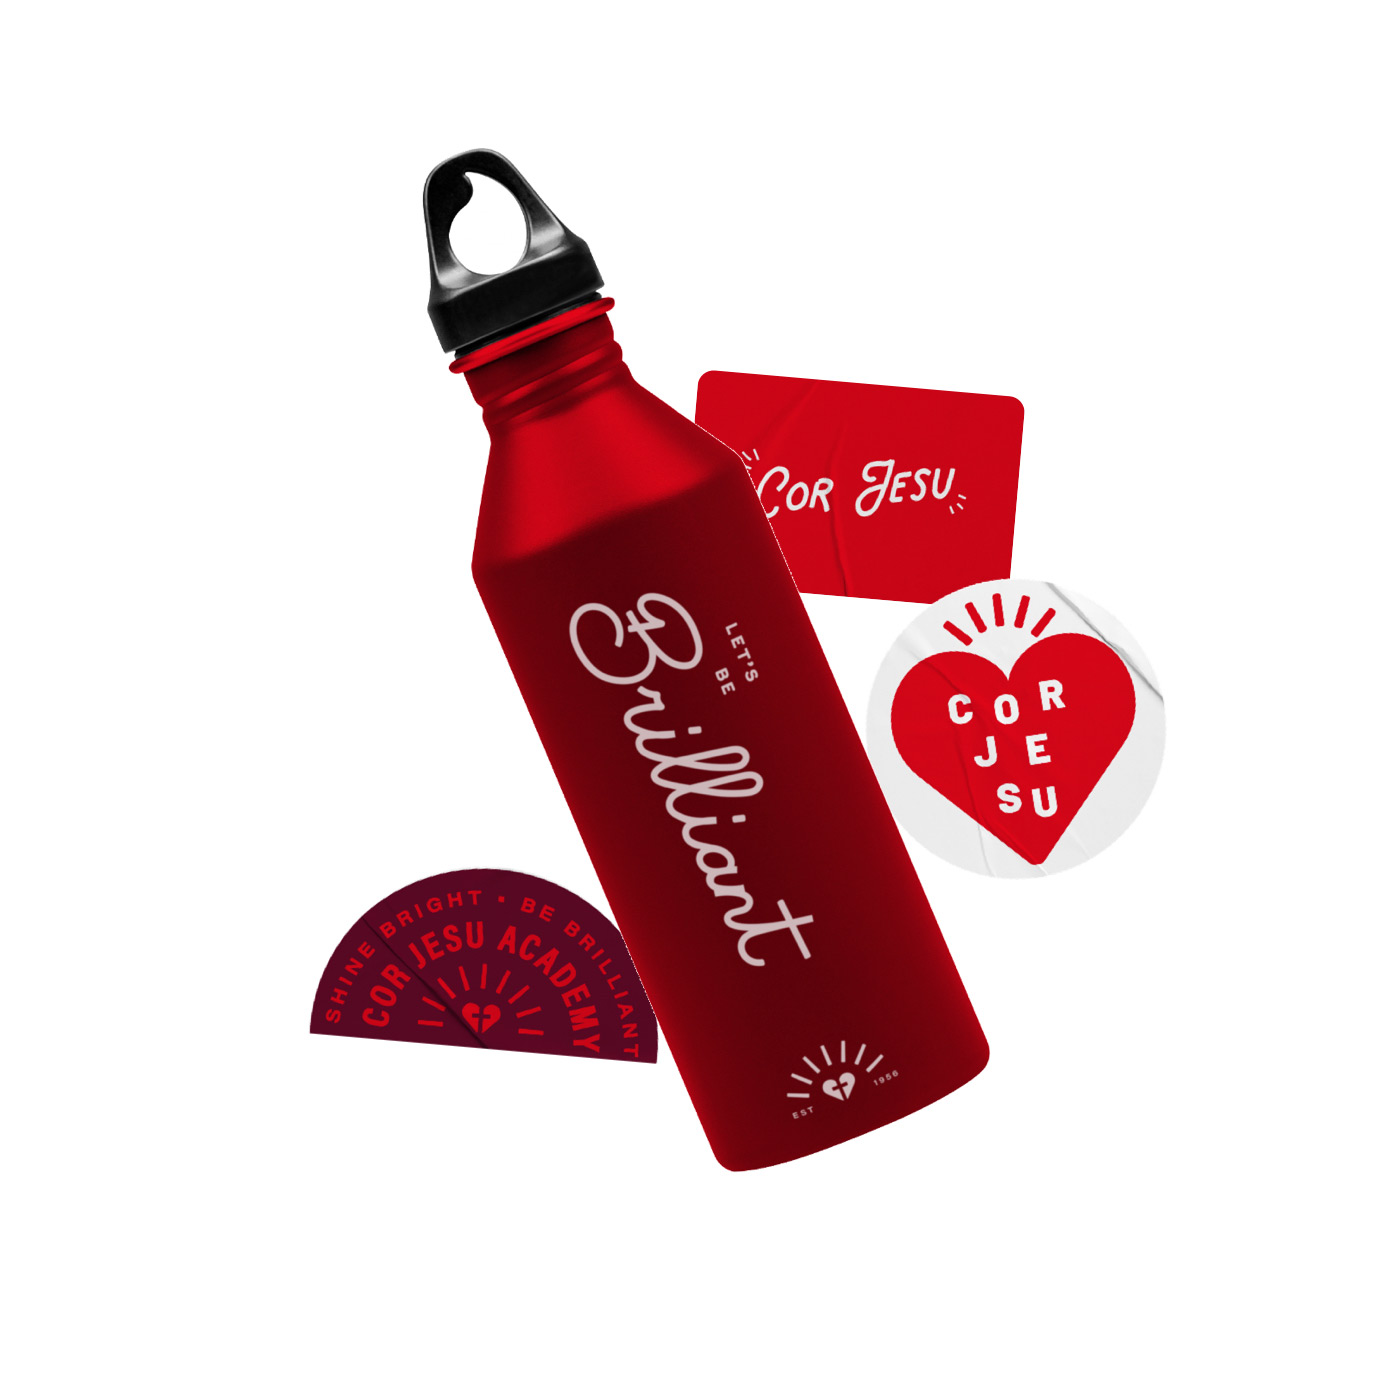 Cor Jesu swag with the new branding, including stickers and a water bottle